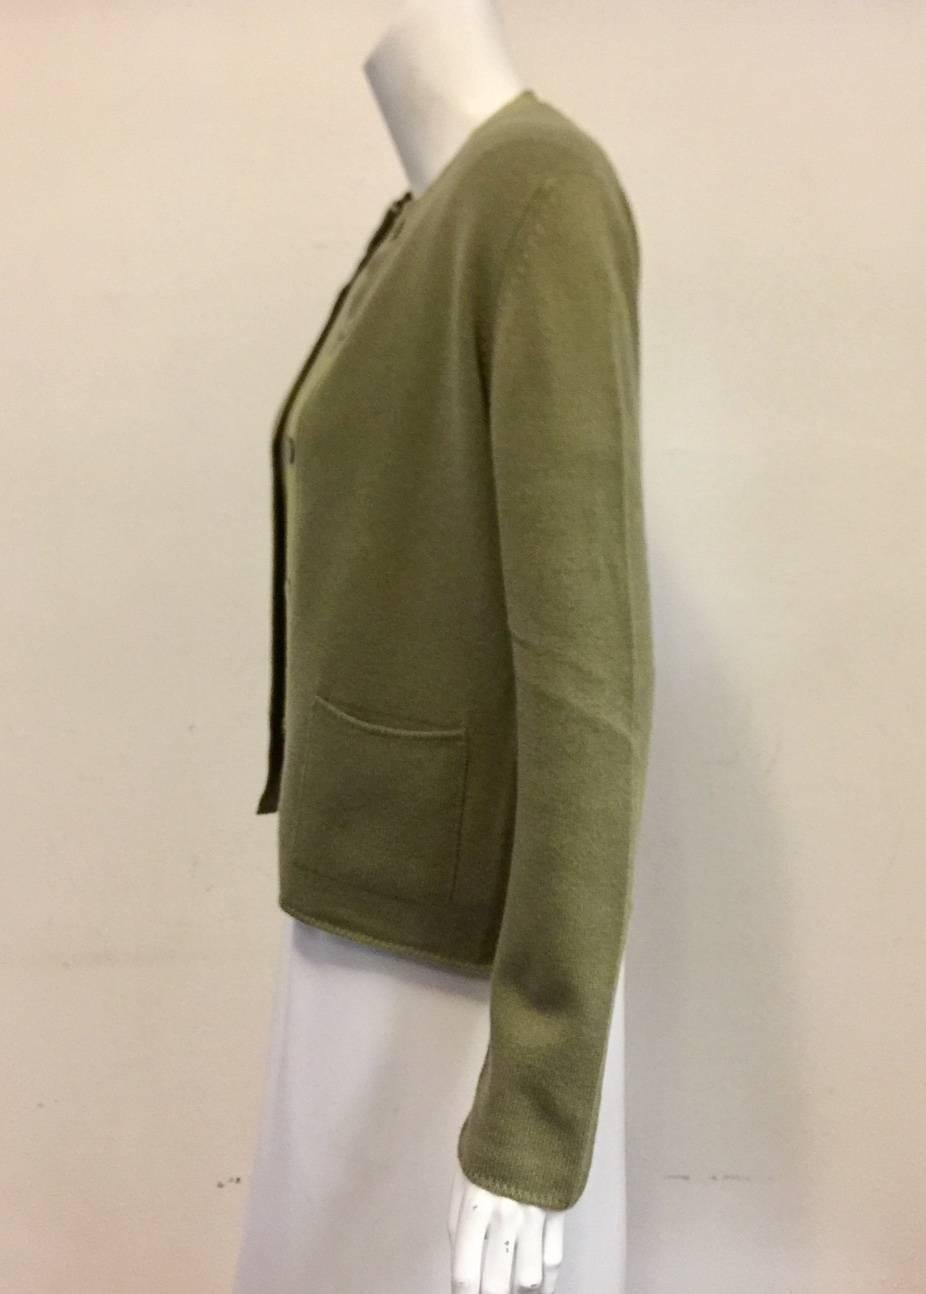 Made in the United Kingdom, this Chanel Olive Twinset is a must for trips across the English Channel!  Features ultra-luxurious cashmere, classic 